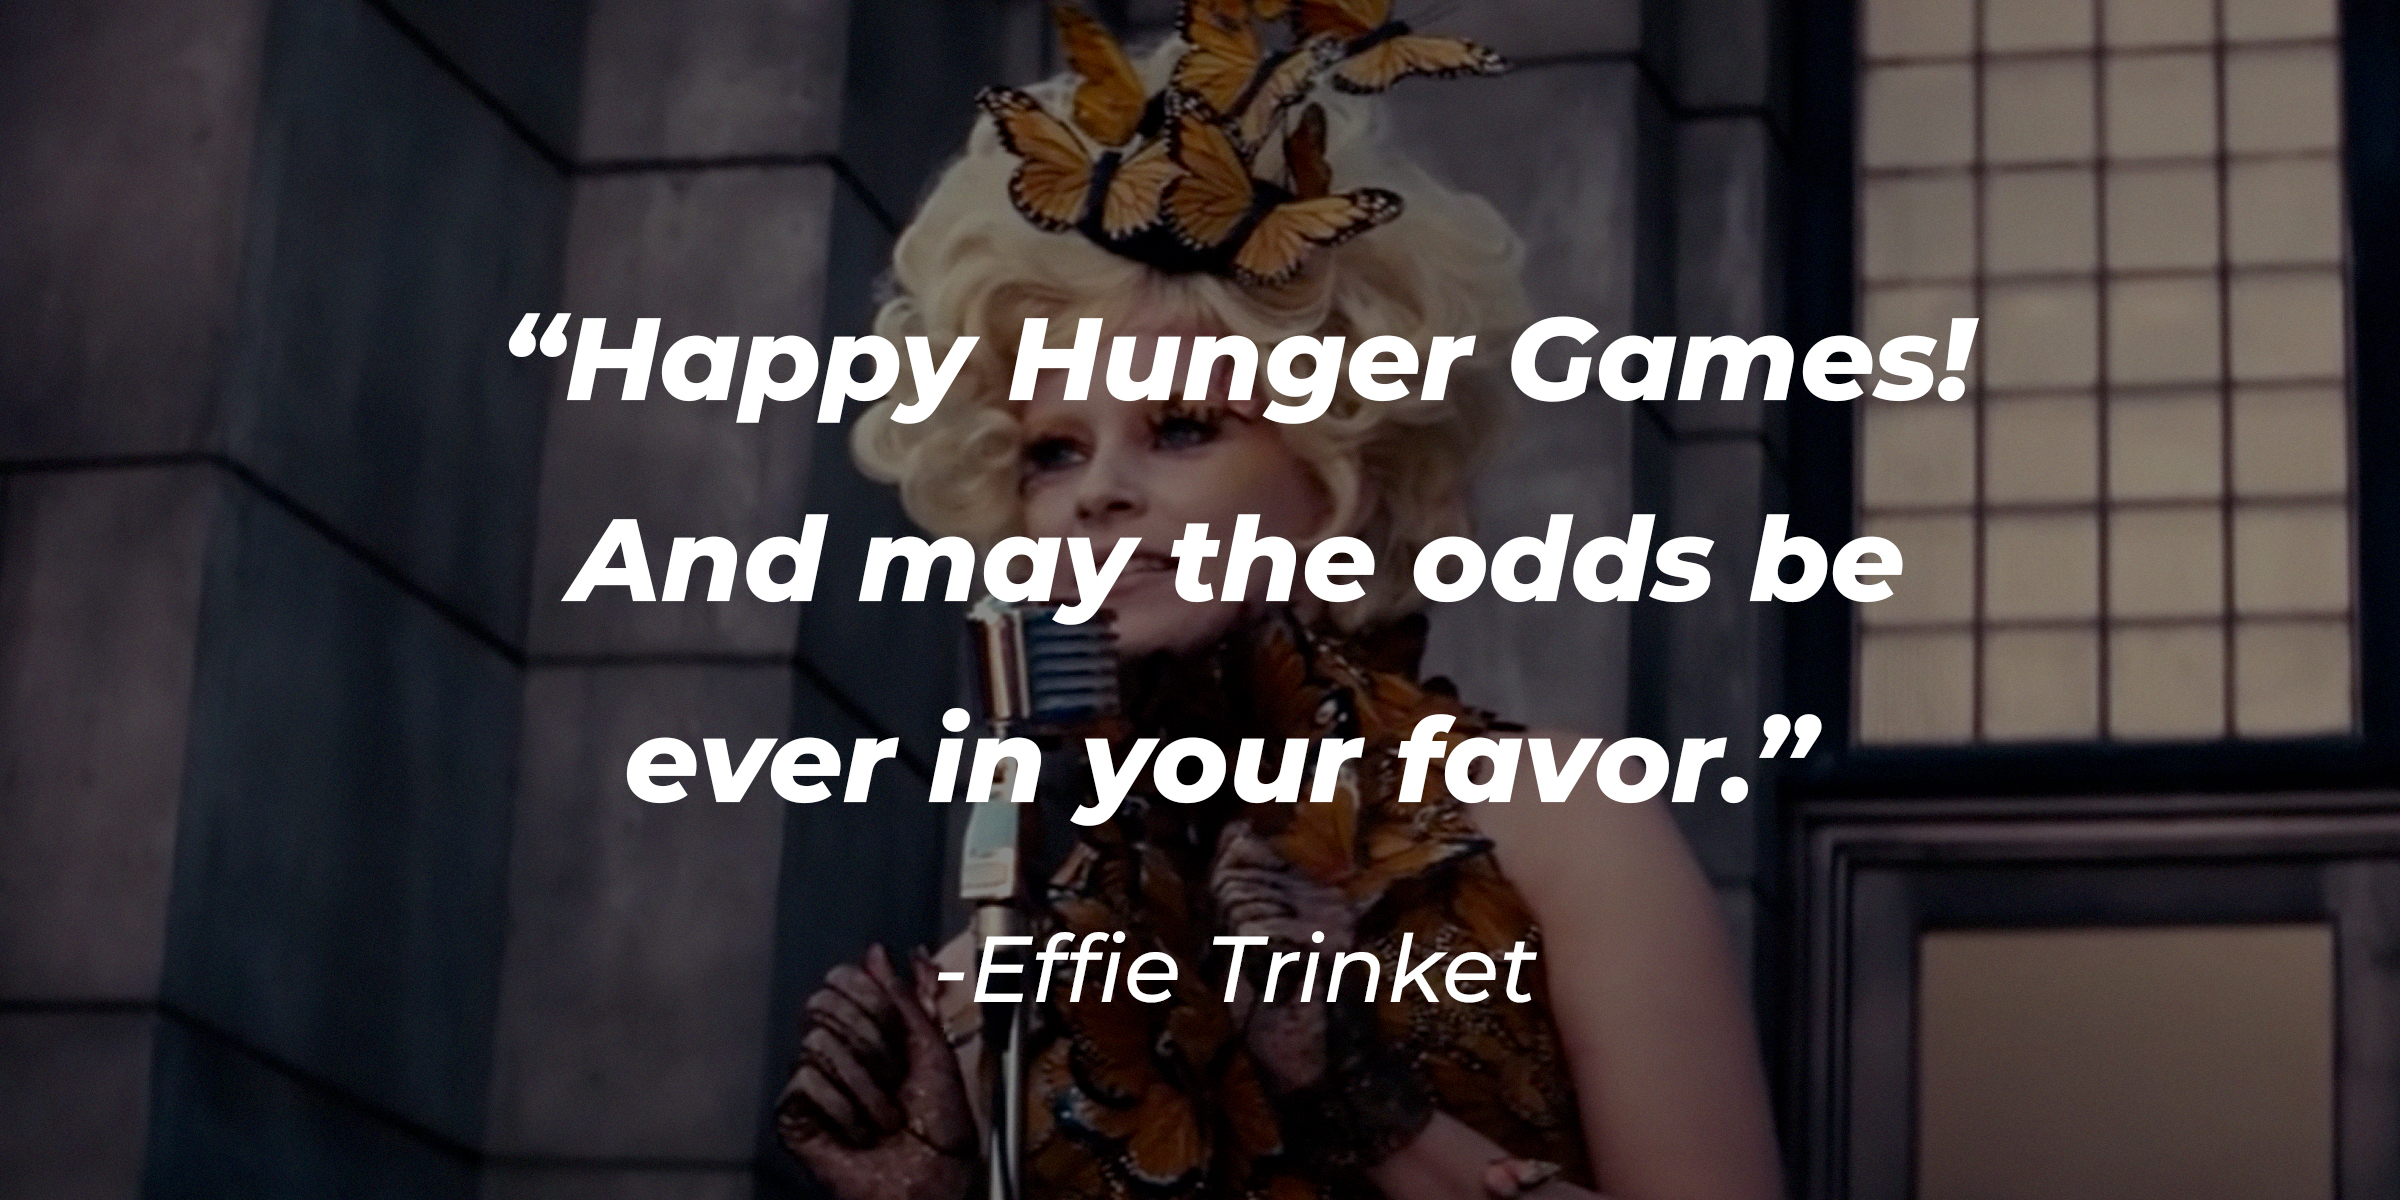 Effie Trinket, with her quote: "Happy 'Hunger Games!' And may the odds be ever in your favor.' | Source: facebook.com/TheHungerGamesUkraine